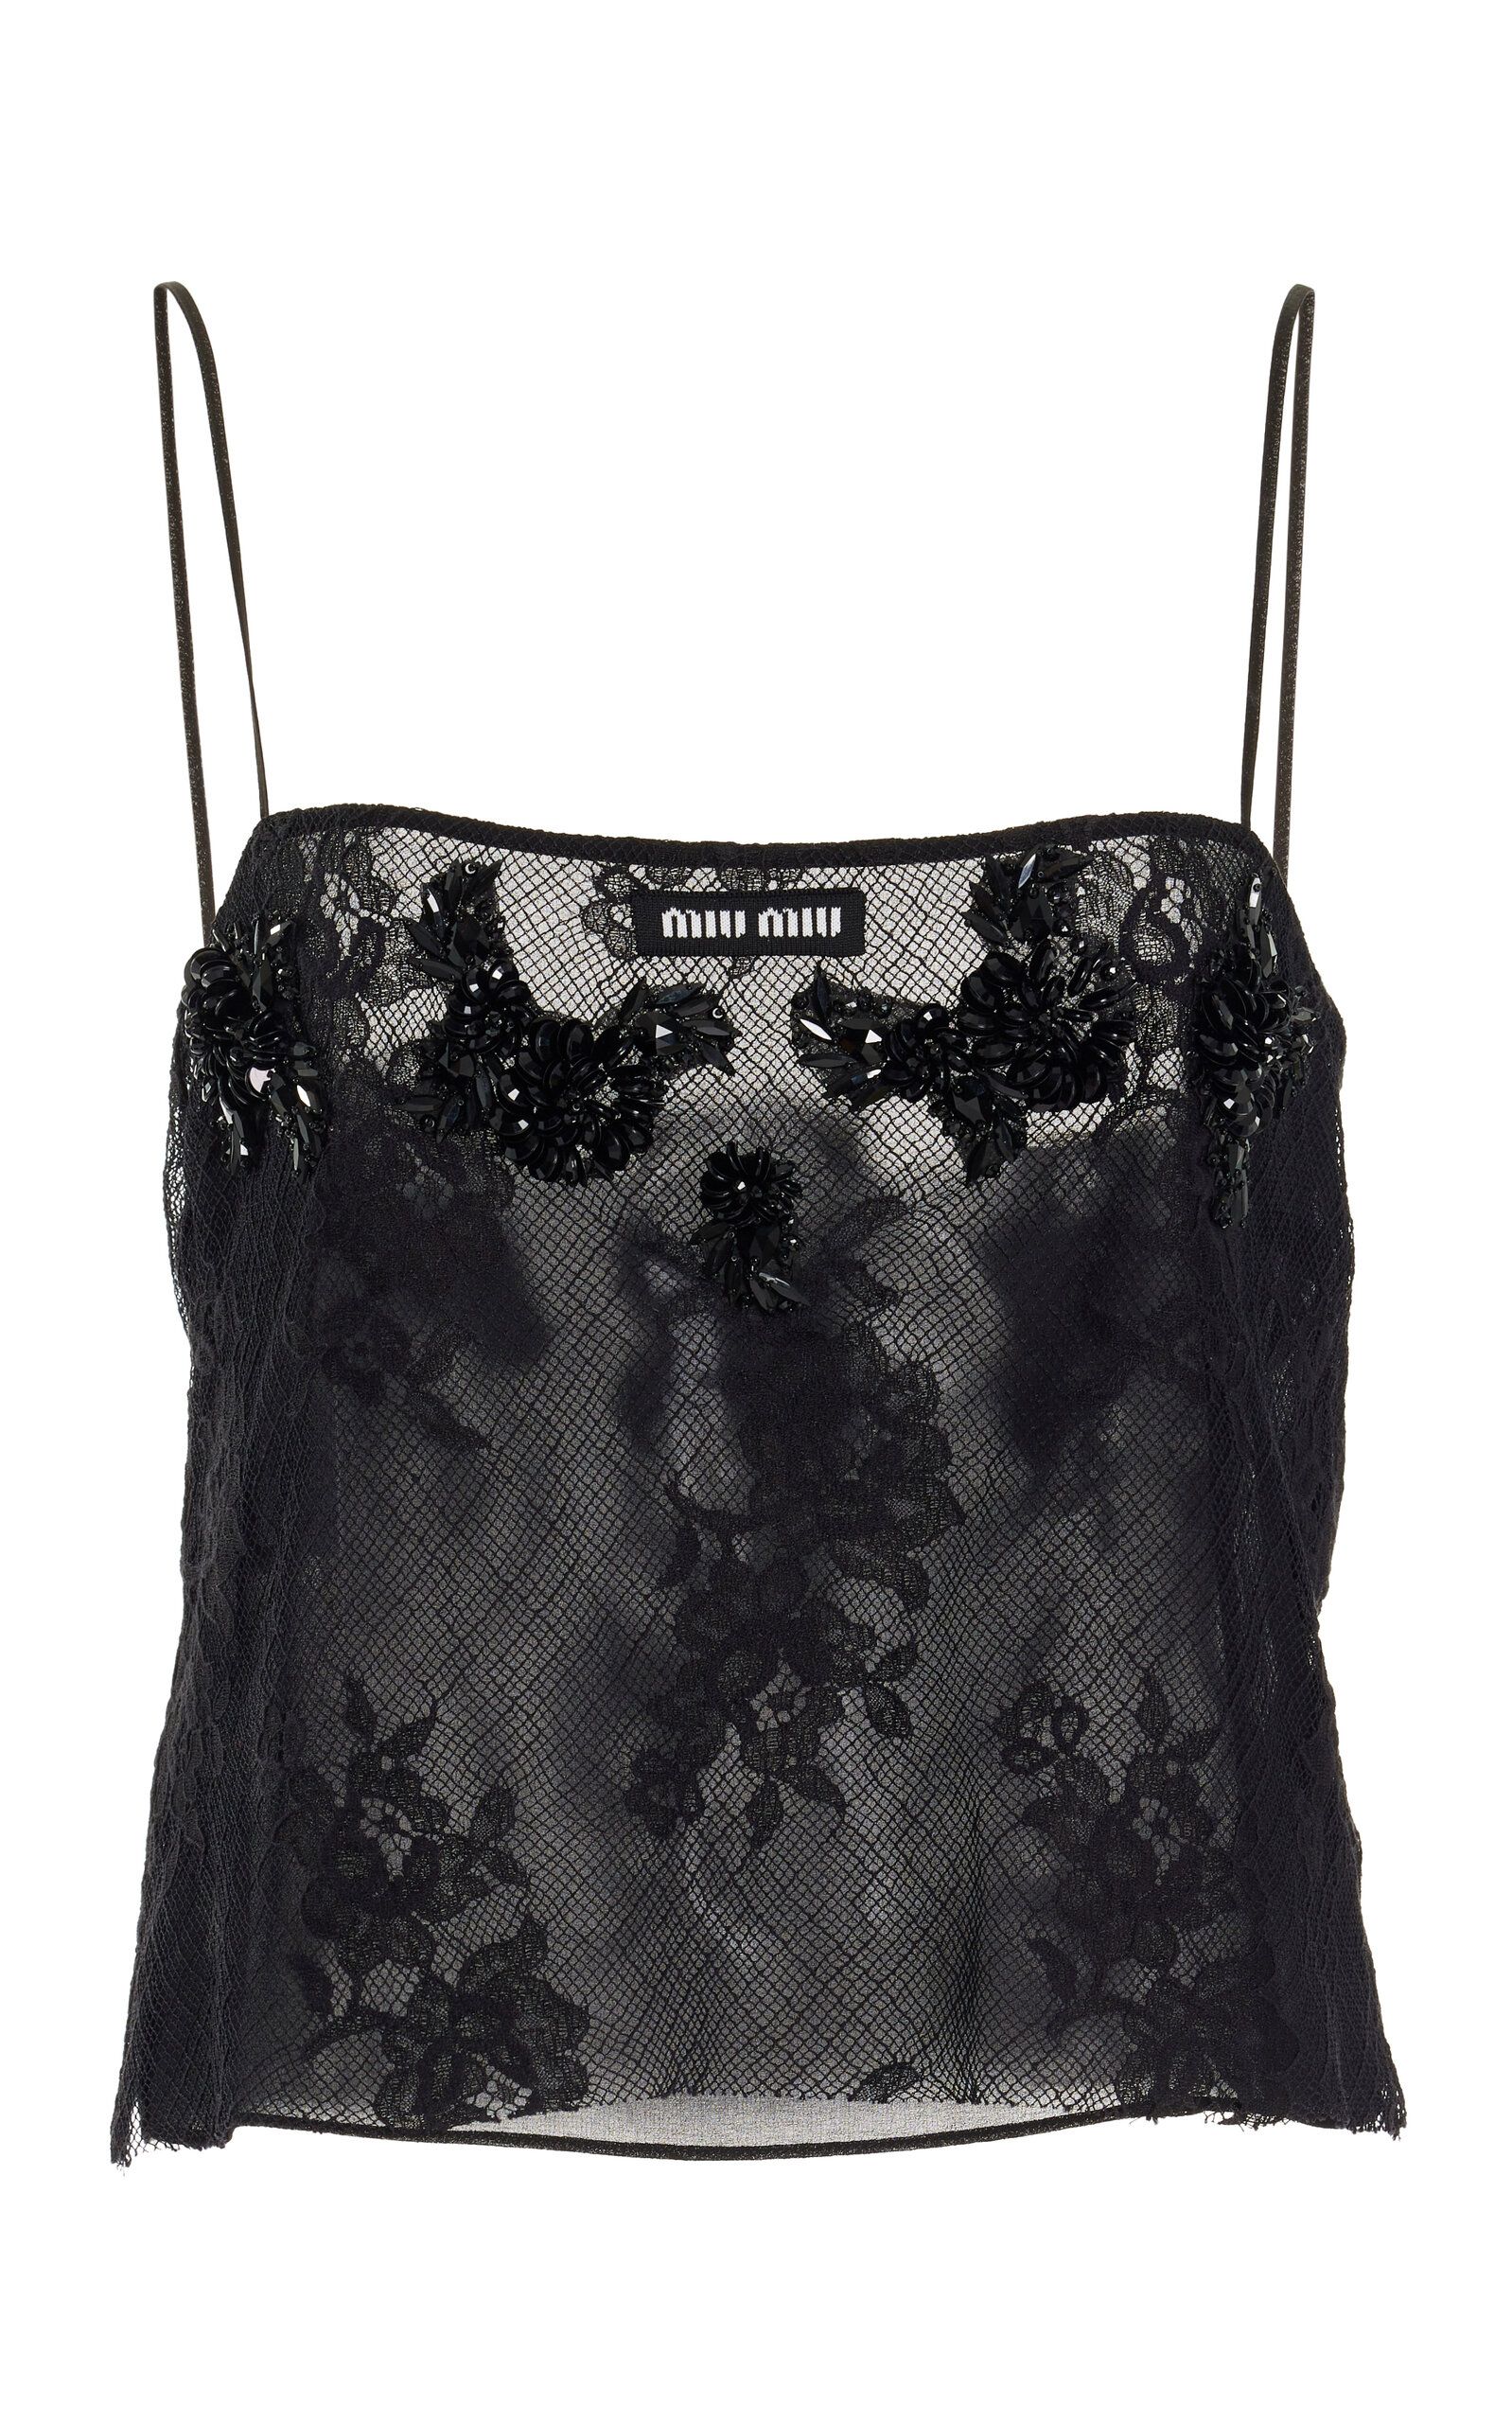 Lace Tops For Women: Feminine Elegance Meets Contemporary Style